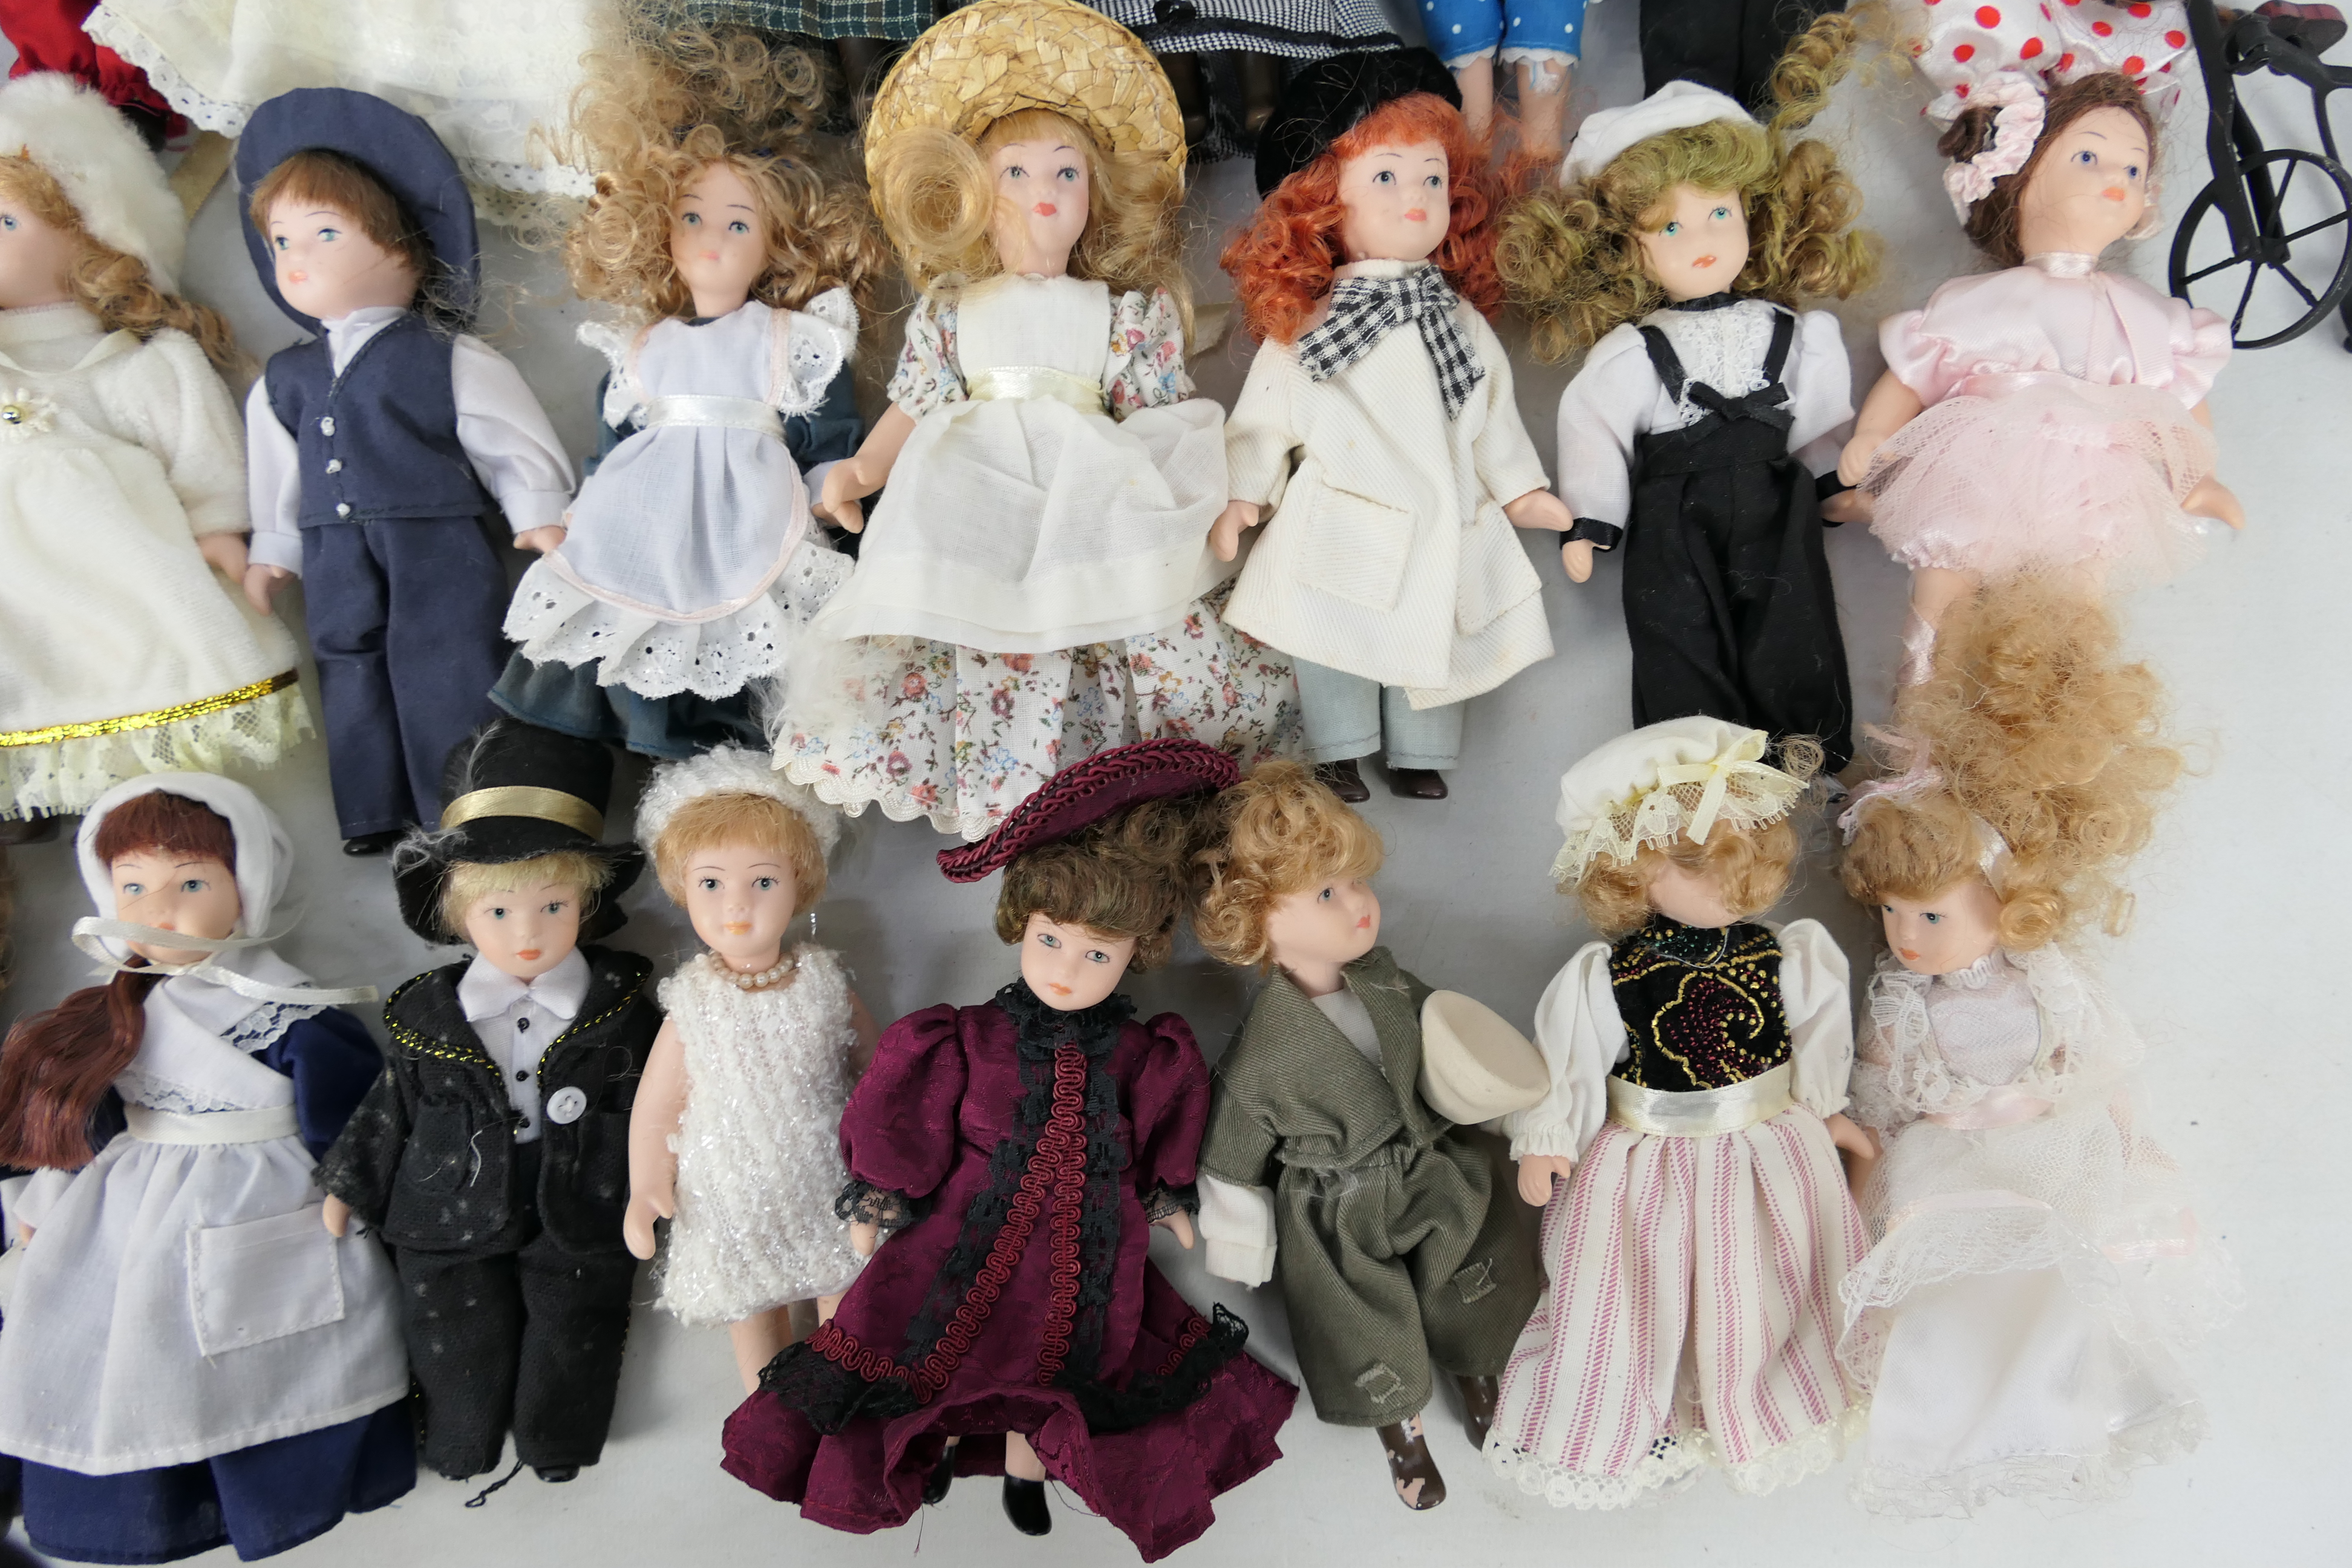 Deagostini - A collection of 25 miniature porcelain dolls attributed to Deagostini. - Image 3 of 5